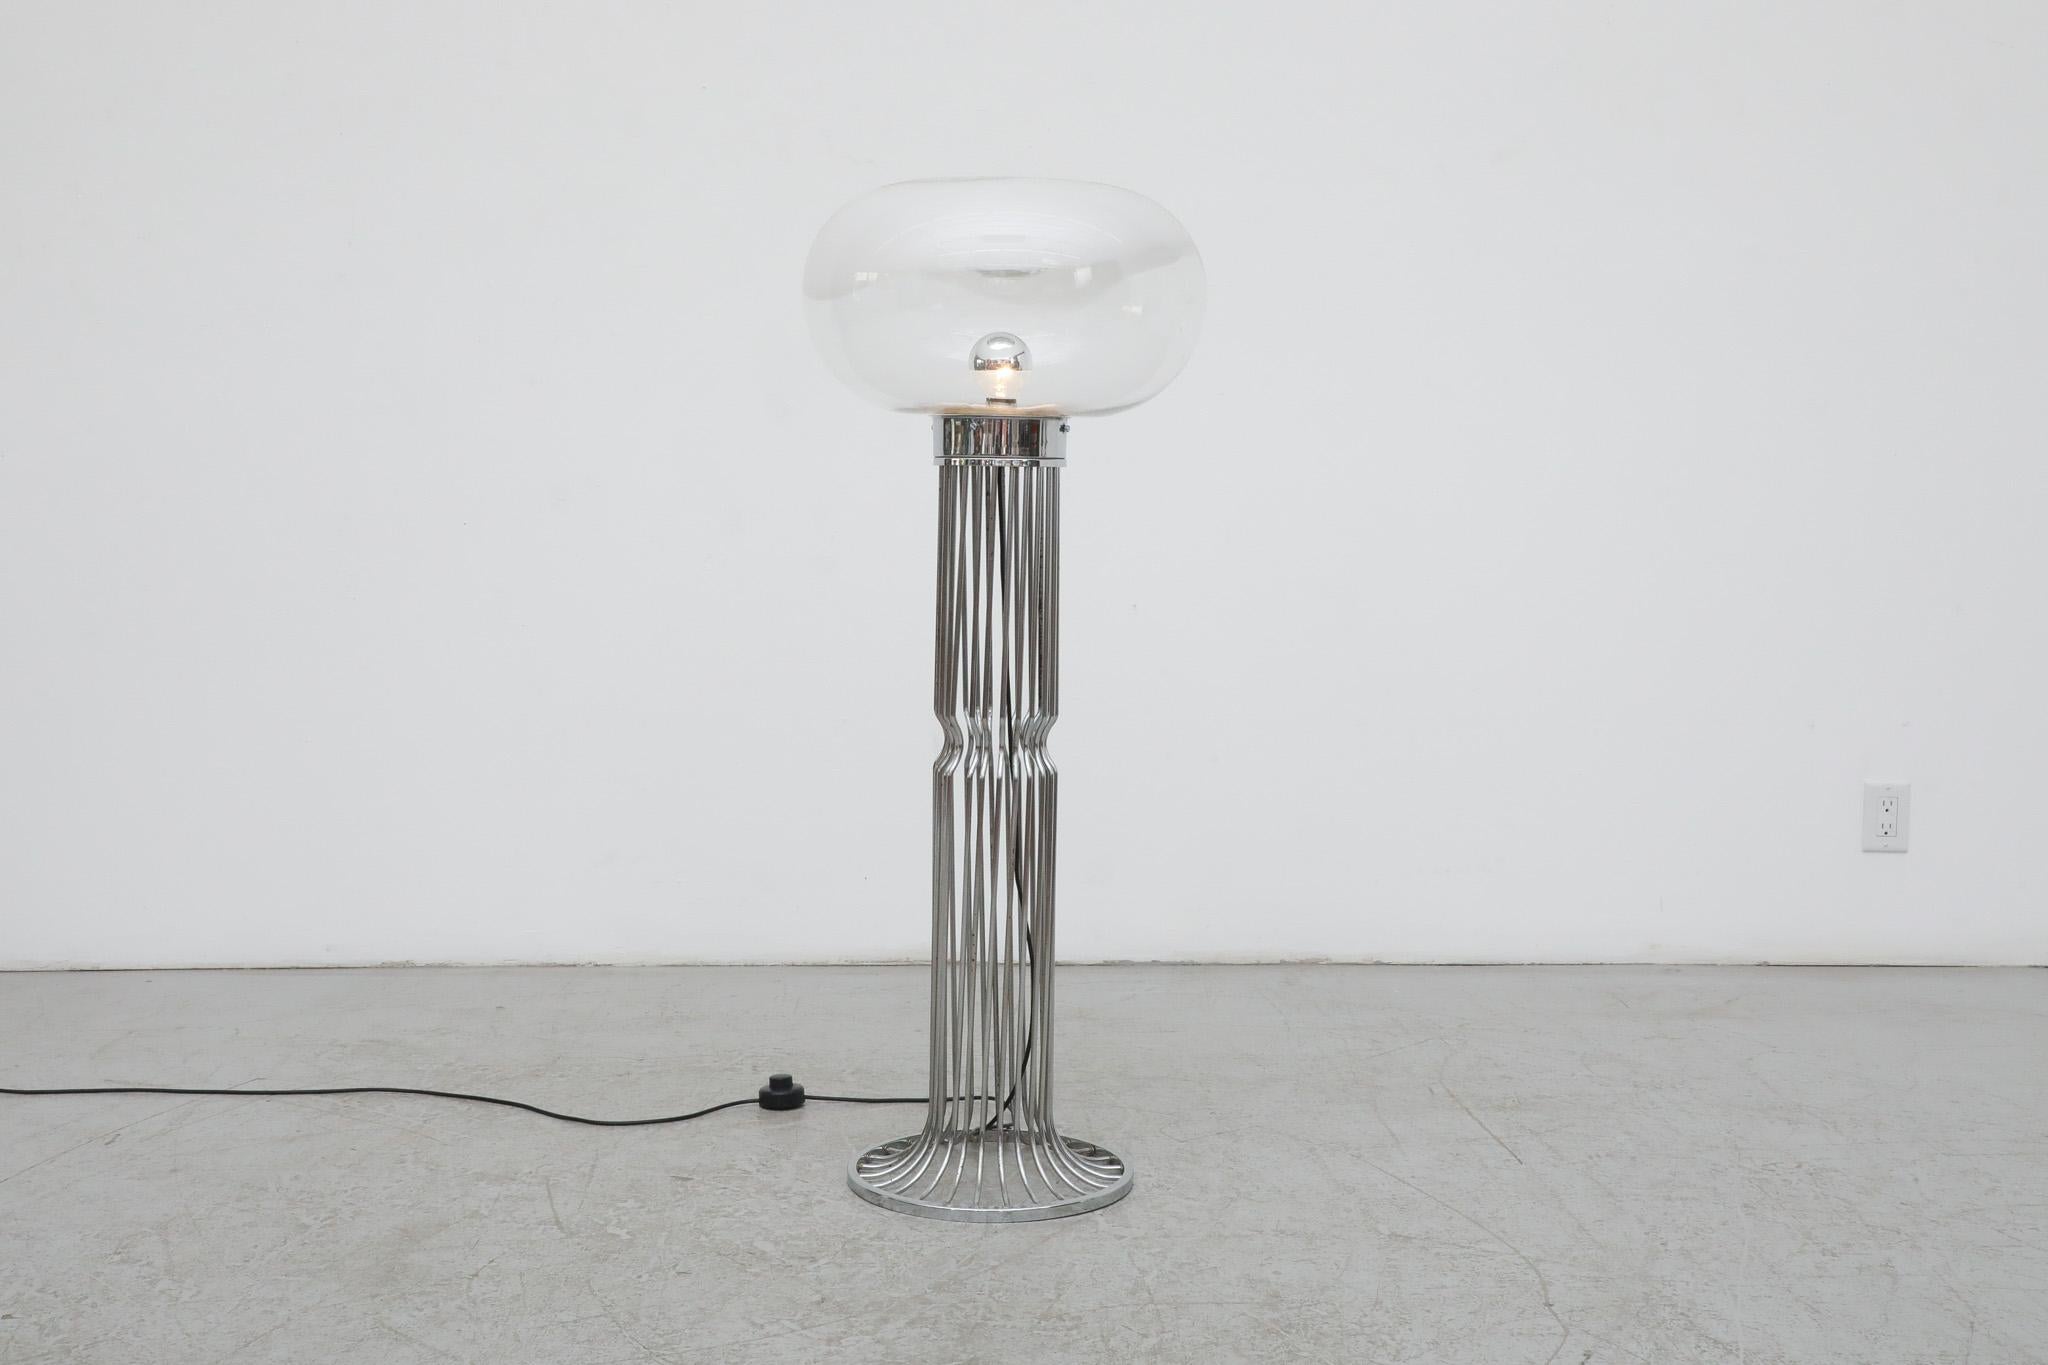 Incredible Carlo Nason (attr) mushroom floor lamp with bent chrome rod base and frosted gradient glass shade. In original condition with some visible wear consistent with age and use. Shot with Mercury tipped bulb.